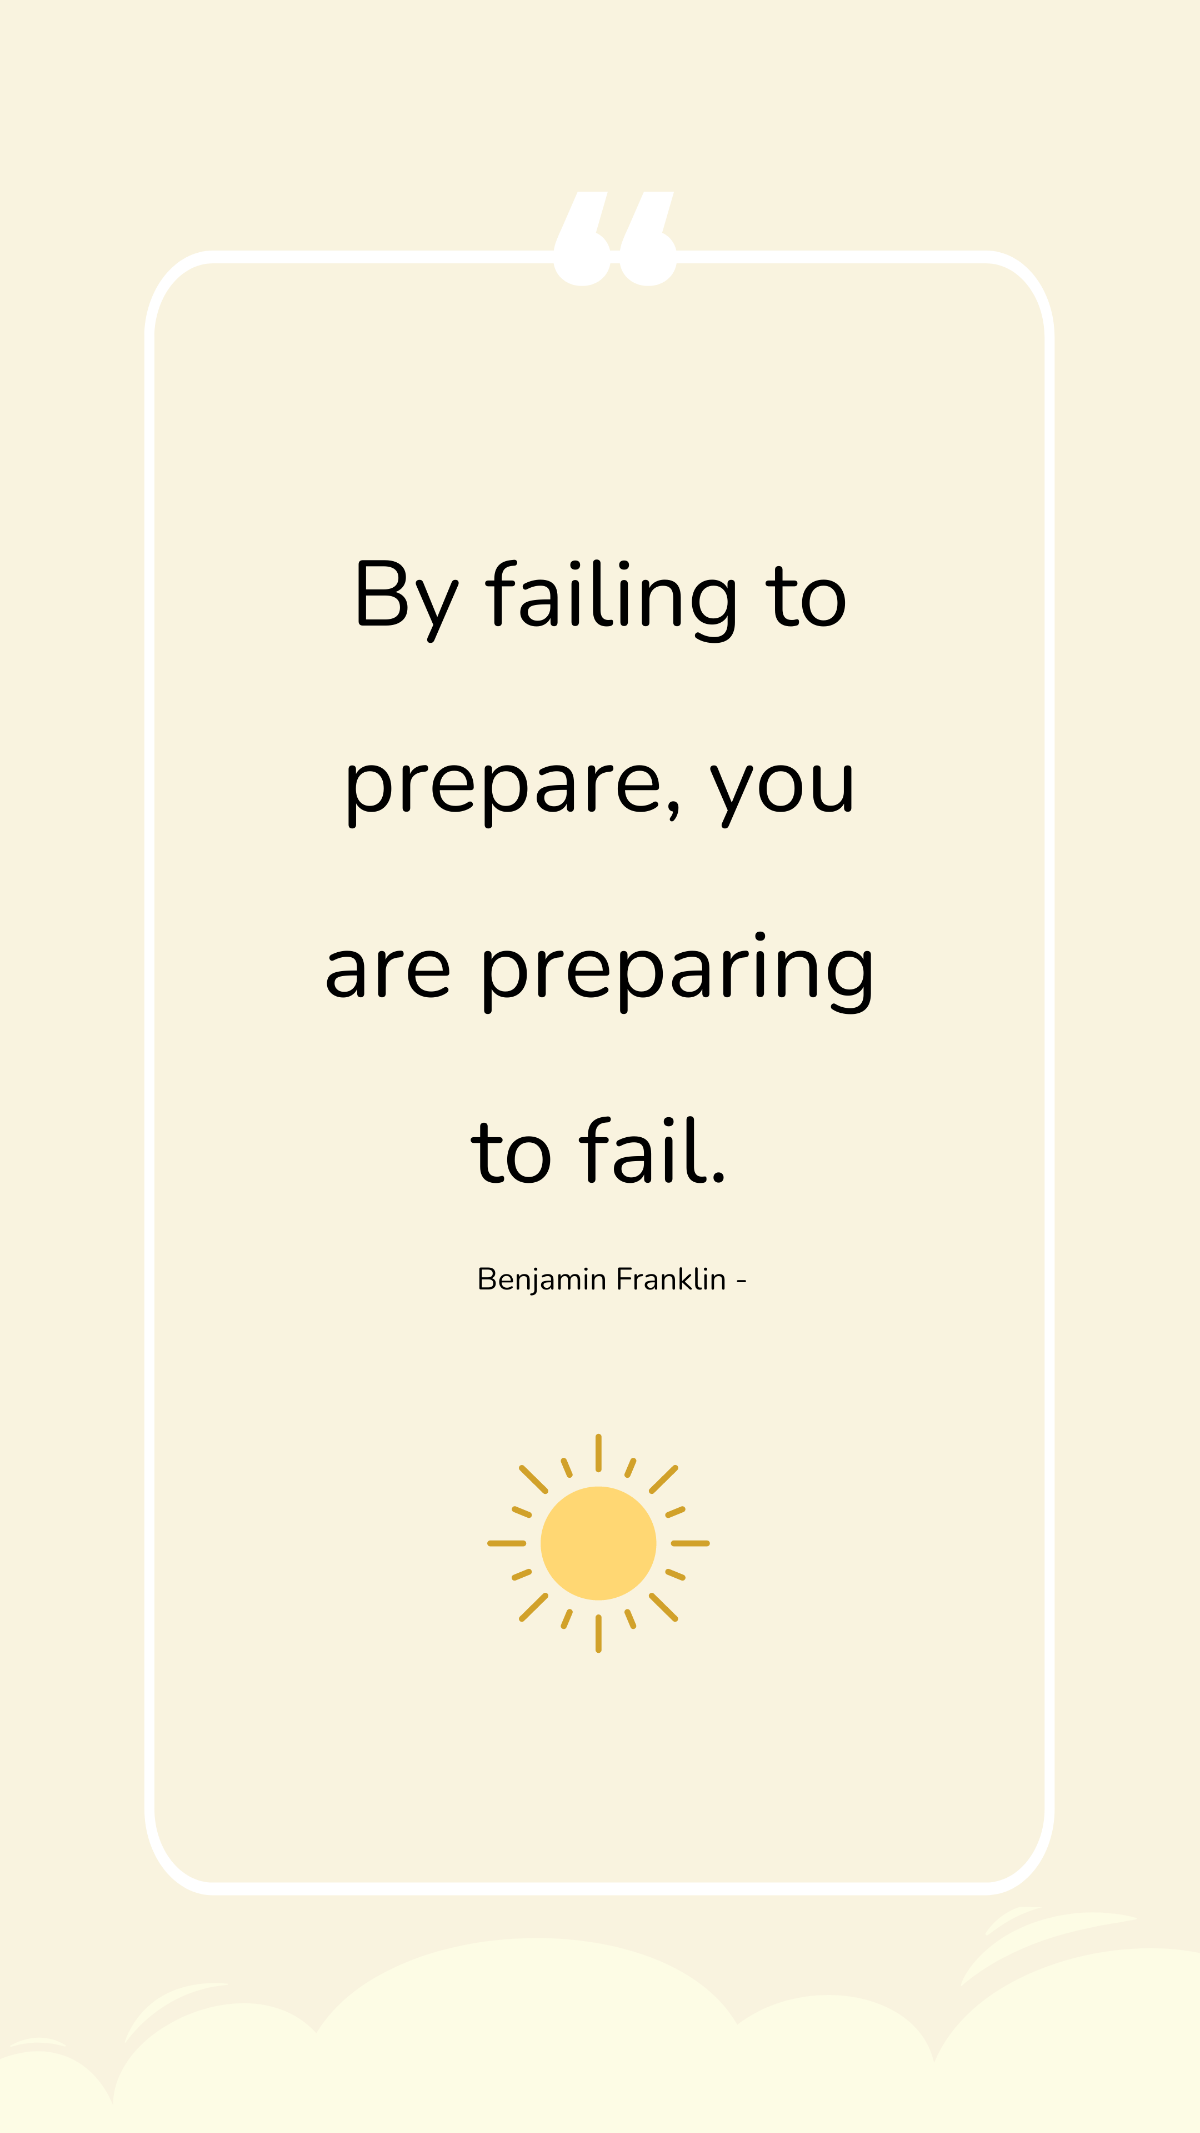 Benjamin Franklin - By failing to prepare, you are preparing to fail. Template